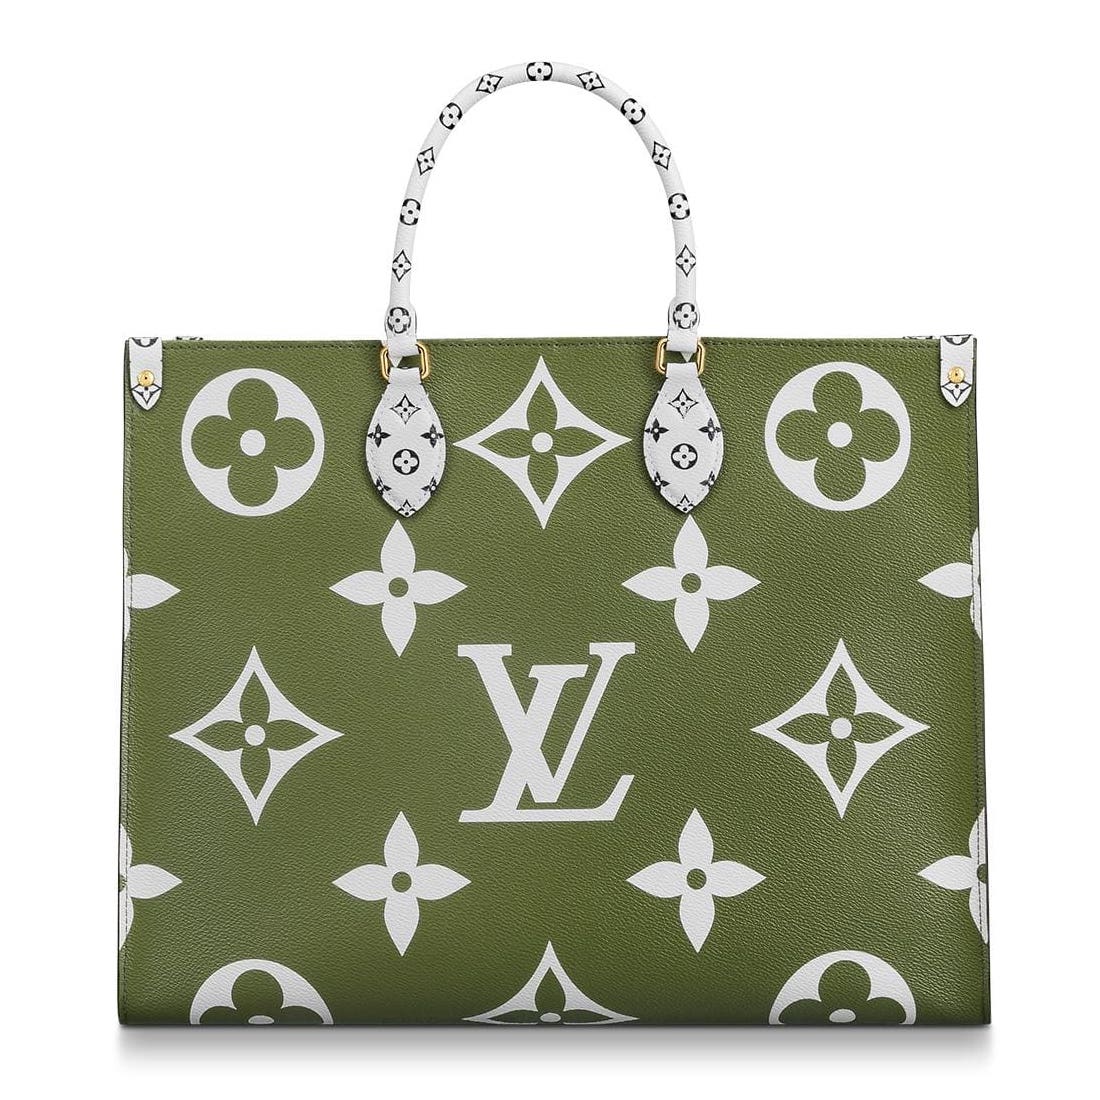 Louis Vuitton Limited Edition Speedy Bag Reference Guide - Spotted Fashion